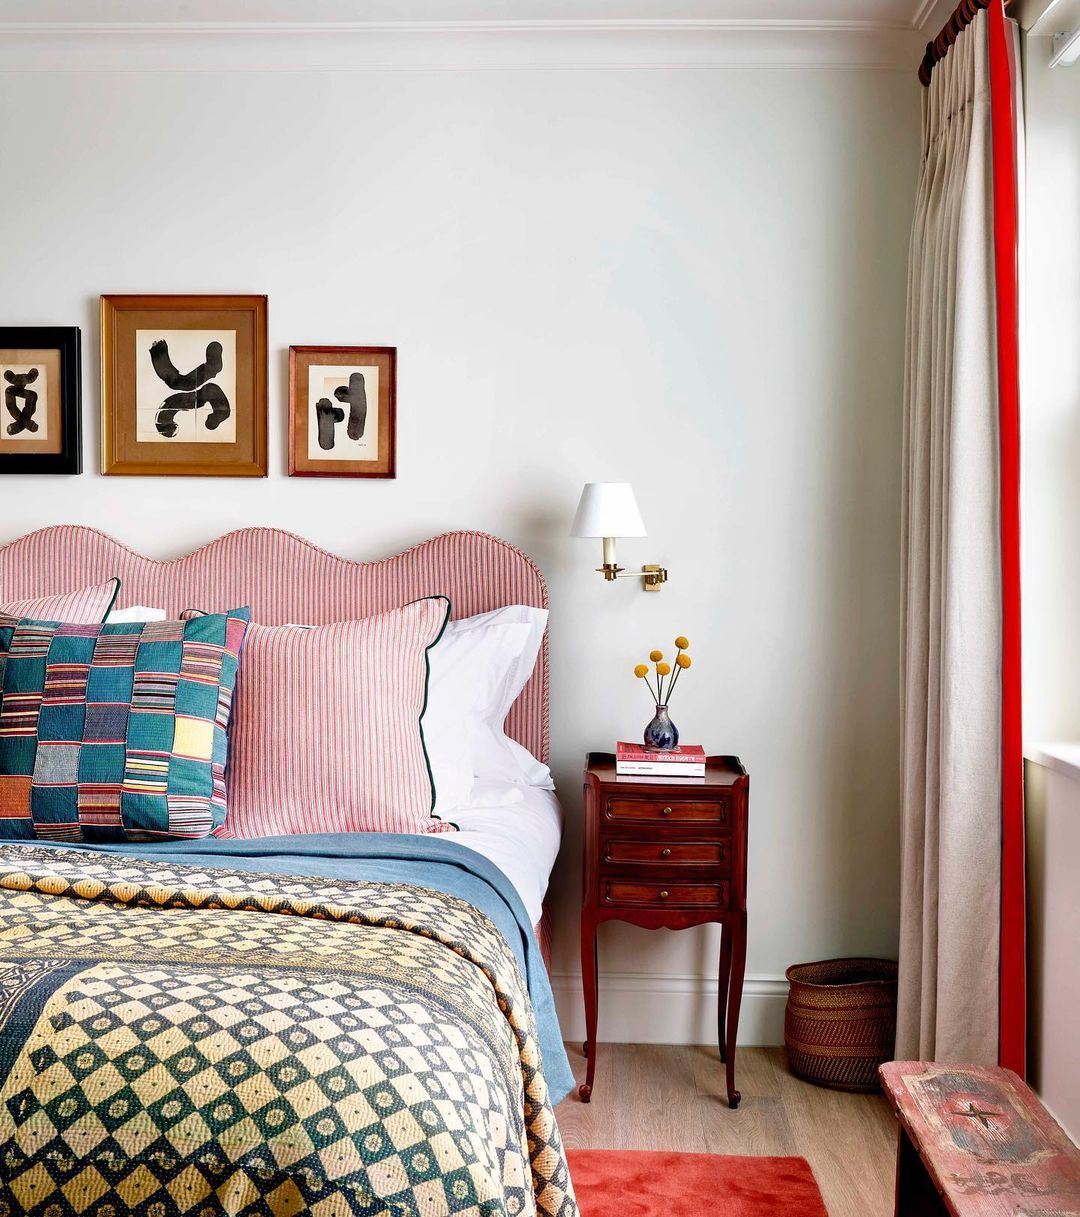 A bedroom with a vibrant pink headboard and colorful bedding, creating a lively and cheerful atmosphere.